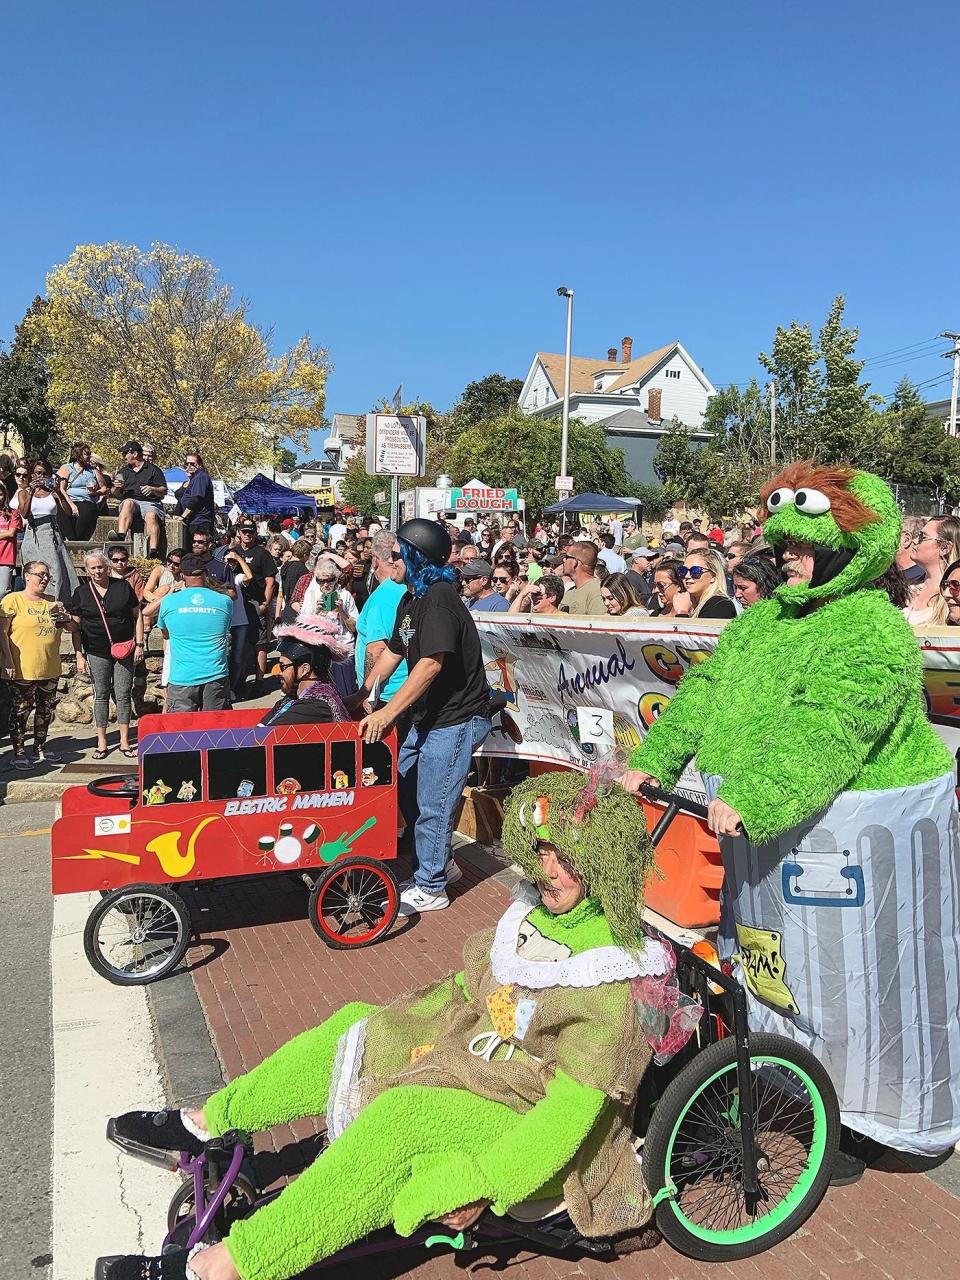 Team Trashy and Electric Mayhem wait at the starting line during last year's Chair Luge event in Gardner, part of the Gardner Ale House Oktoberfest Party in the Street festivities.